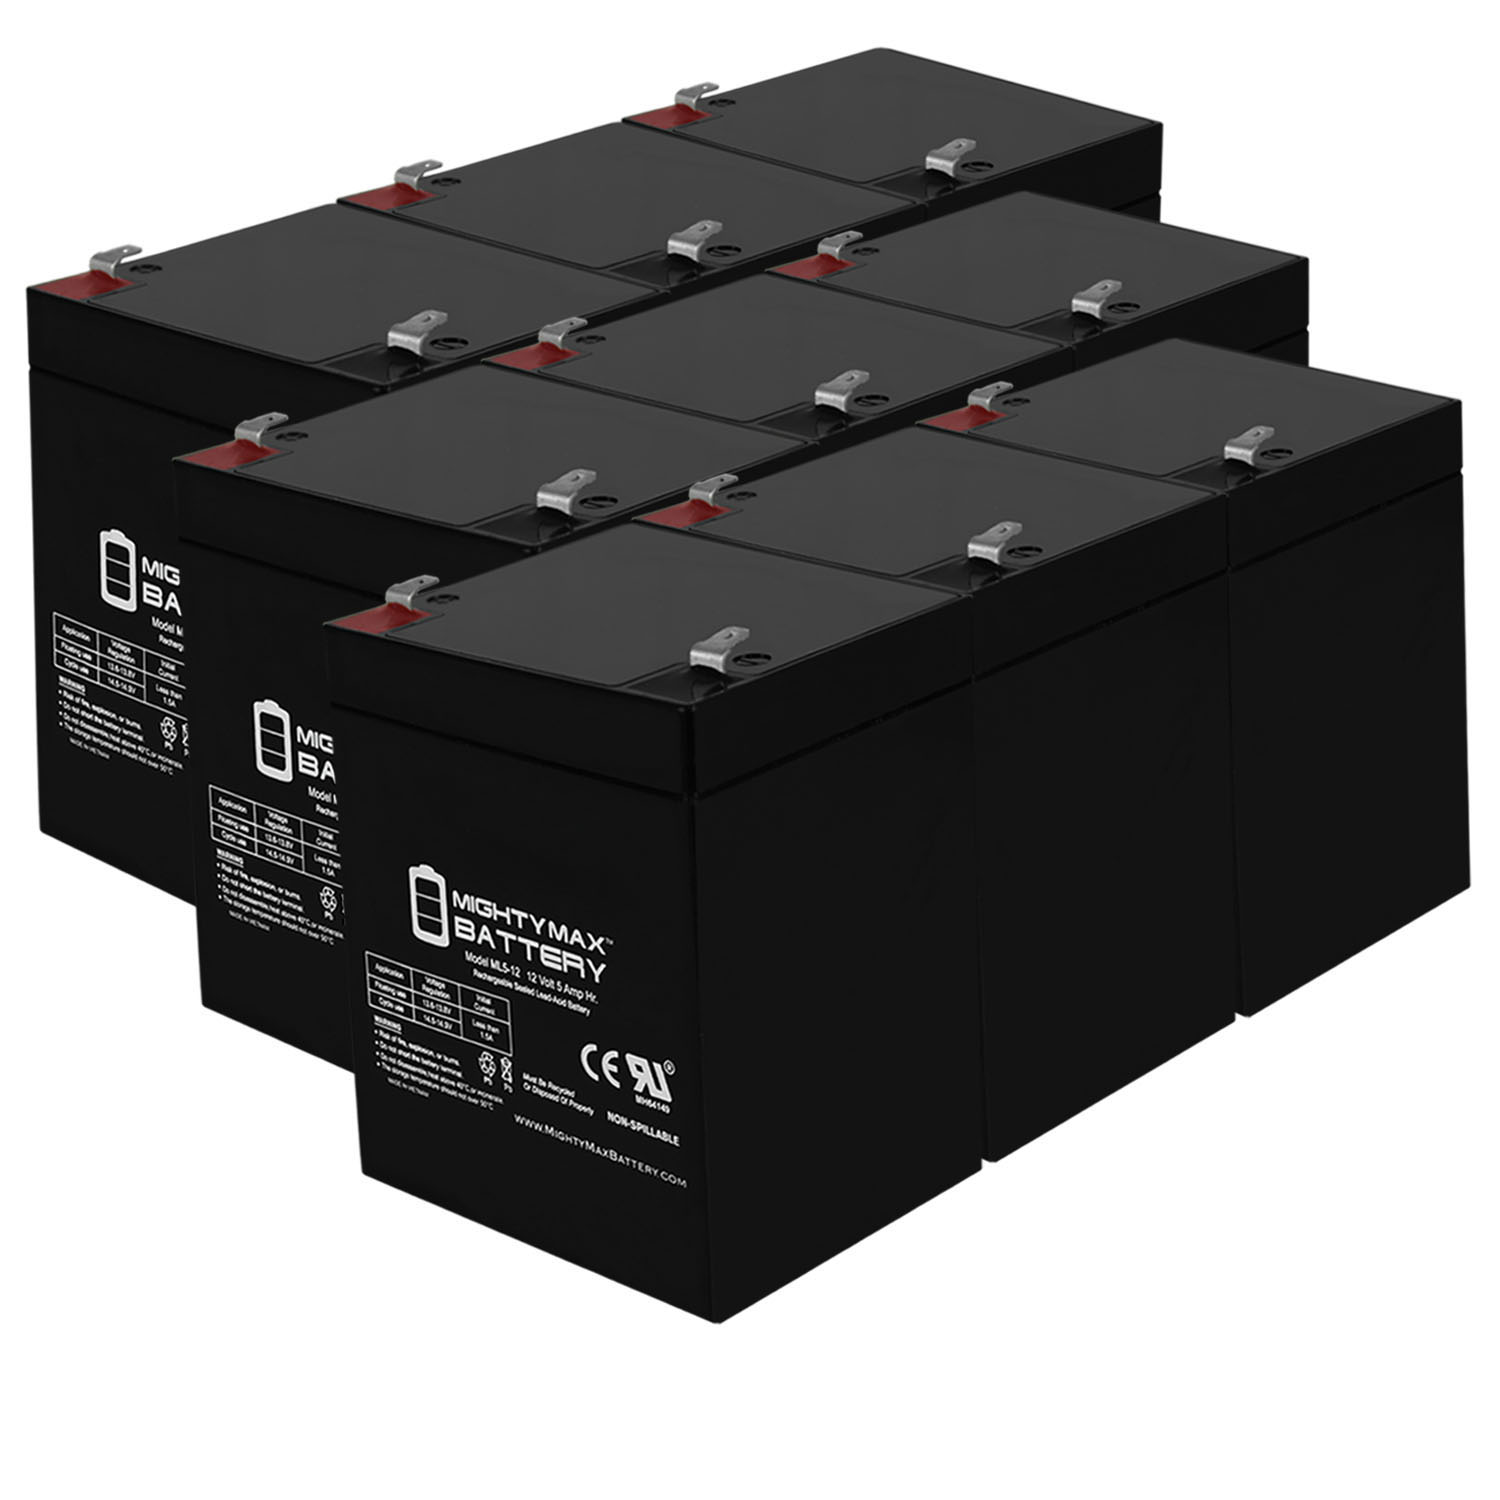 ML5-12 - 12V 5AH SLA Replacement Battery for APC UPS Computer Back Up Power - 9 Pack